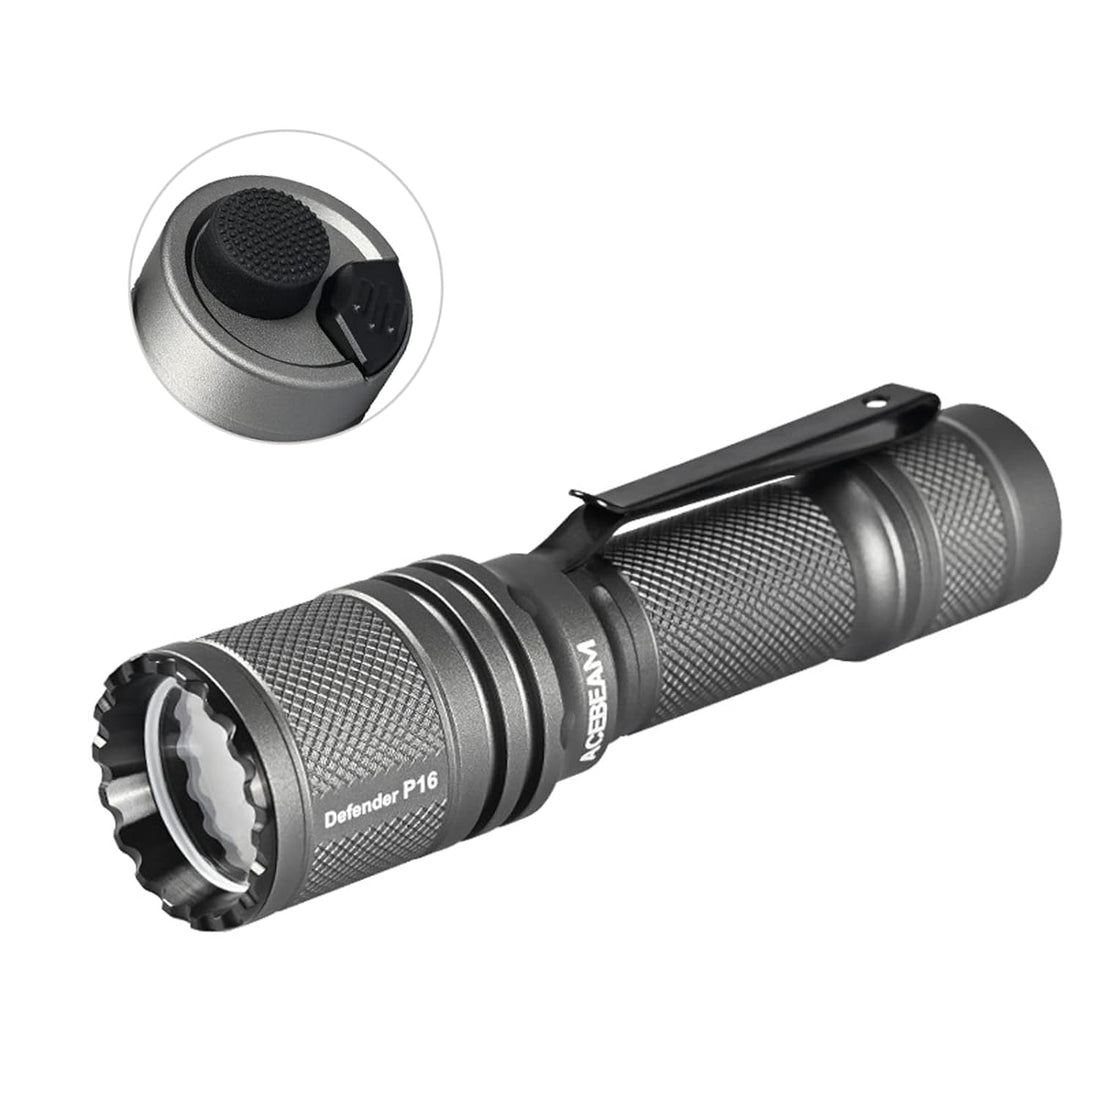 ACEBEAM P16 Tactical Flashlight Tail-Dual Switch 1800 Lumens 484m Beam Distance USBC Rechargeable IP68 Waterproof Powerful Portable Small LED Flashlights (Grey)